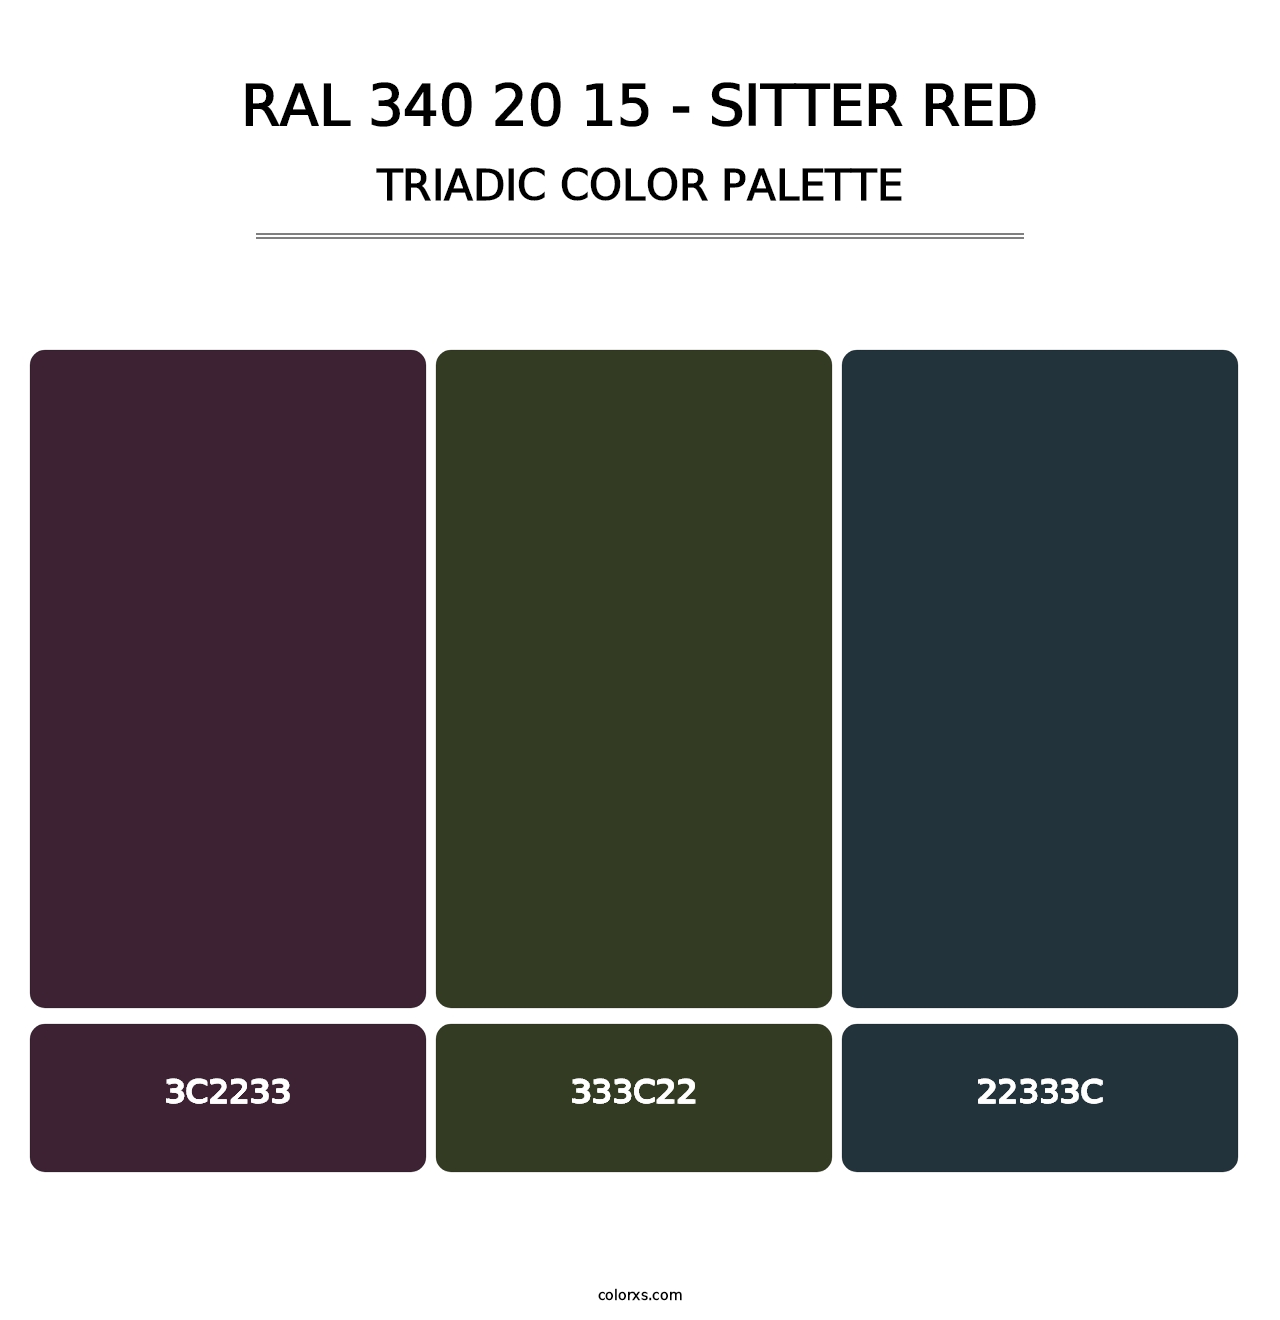 RAL 340 20 15 - Sitter Red - Triadic Color Palette